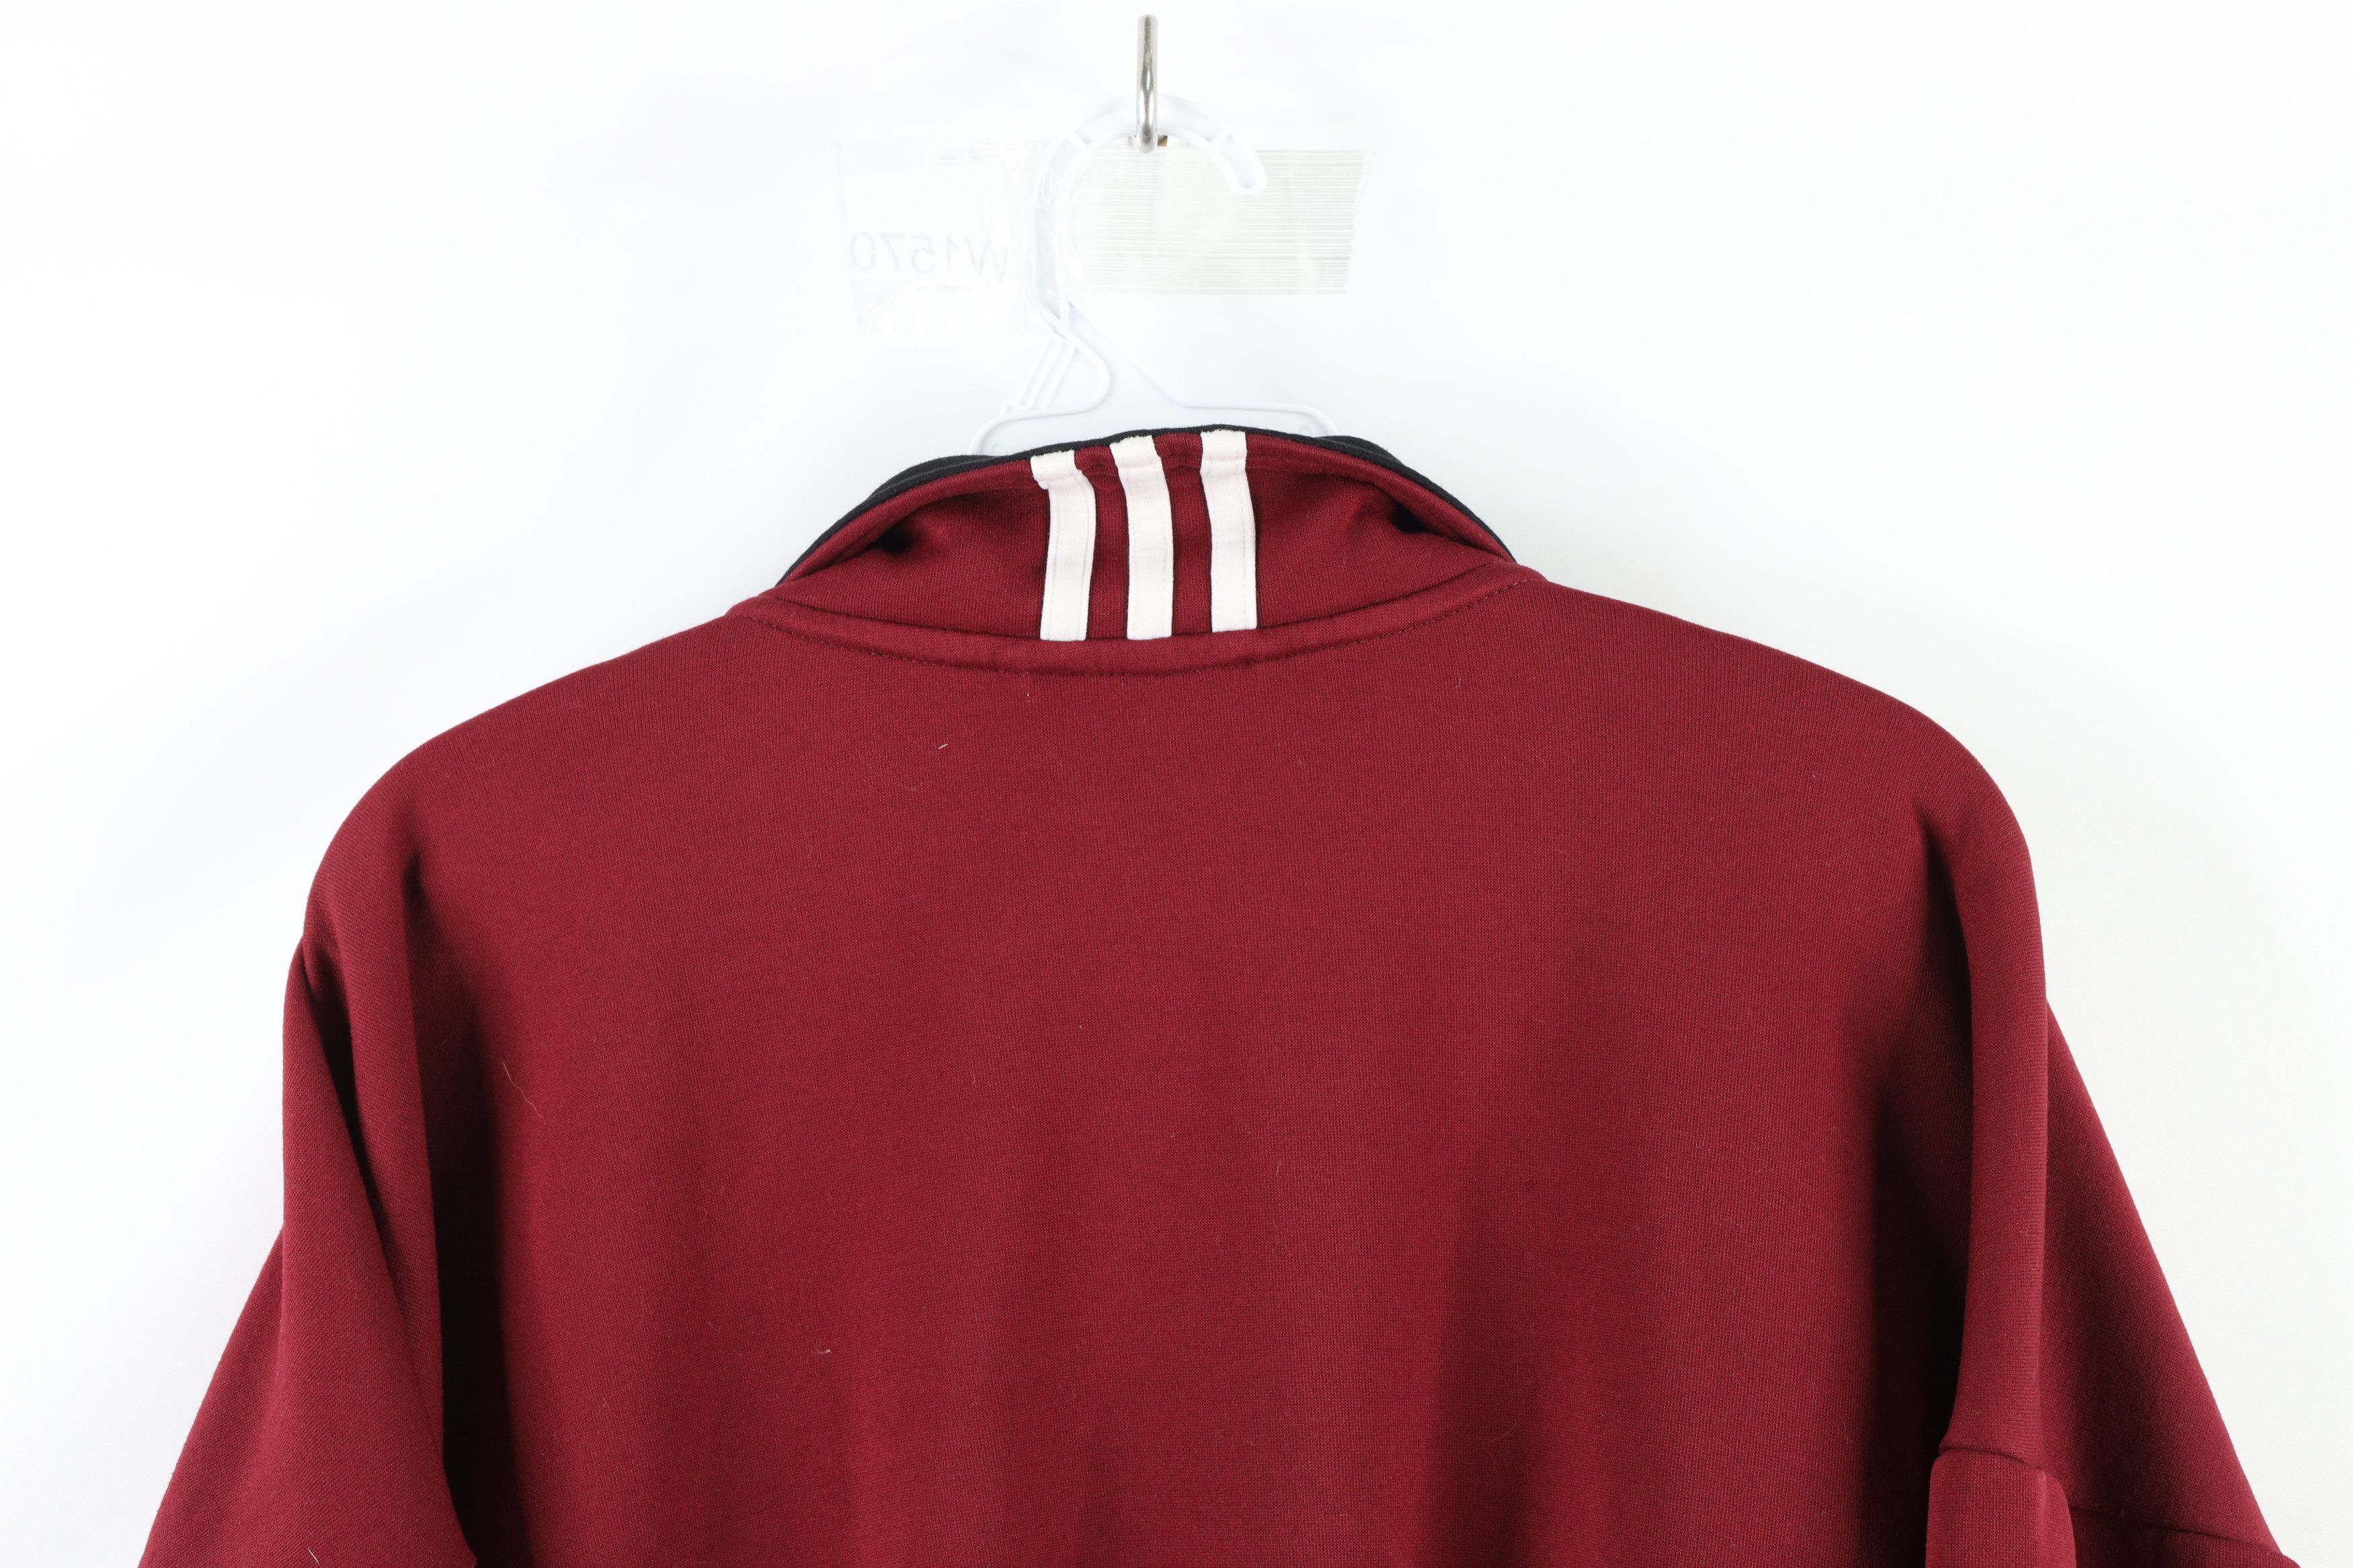 Adidas Vintage Adidas Spell Out Striped Soccer Warm Up Jacket Size US L / EU 52-54 / 3 - 11 Thumbnail